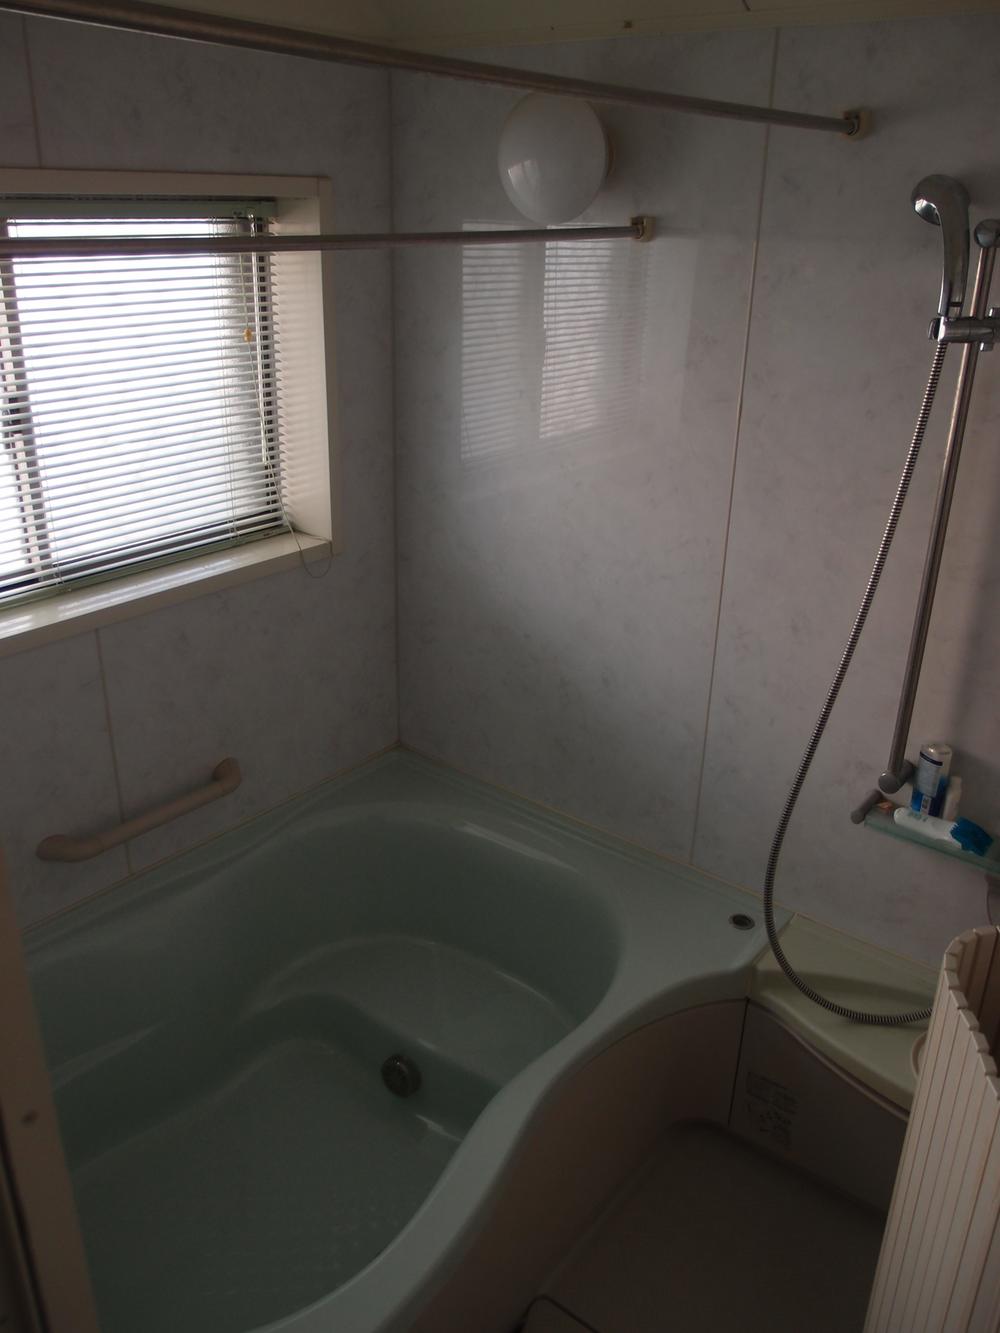 Bathroom. 1.25 is a tsubo size. Add cooked, heating, It is with a ventilation dryer.